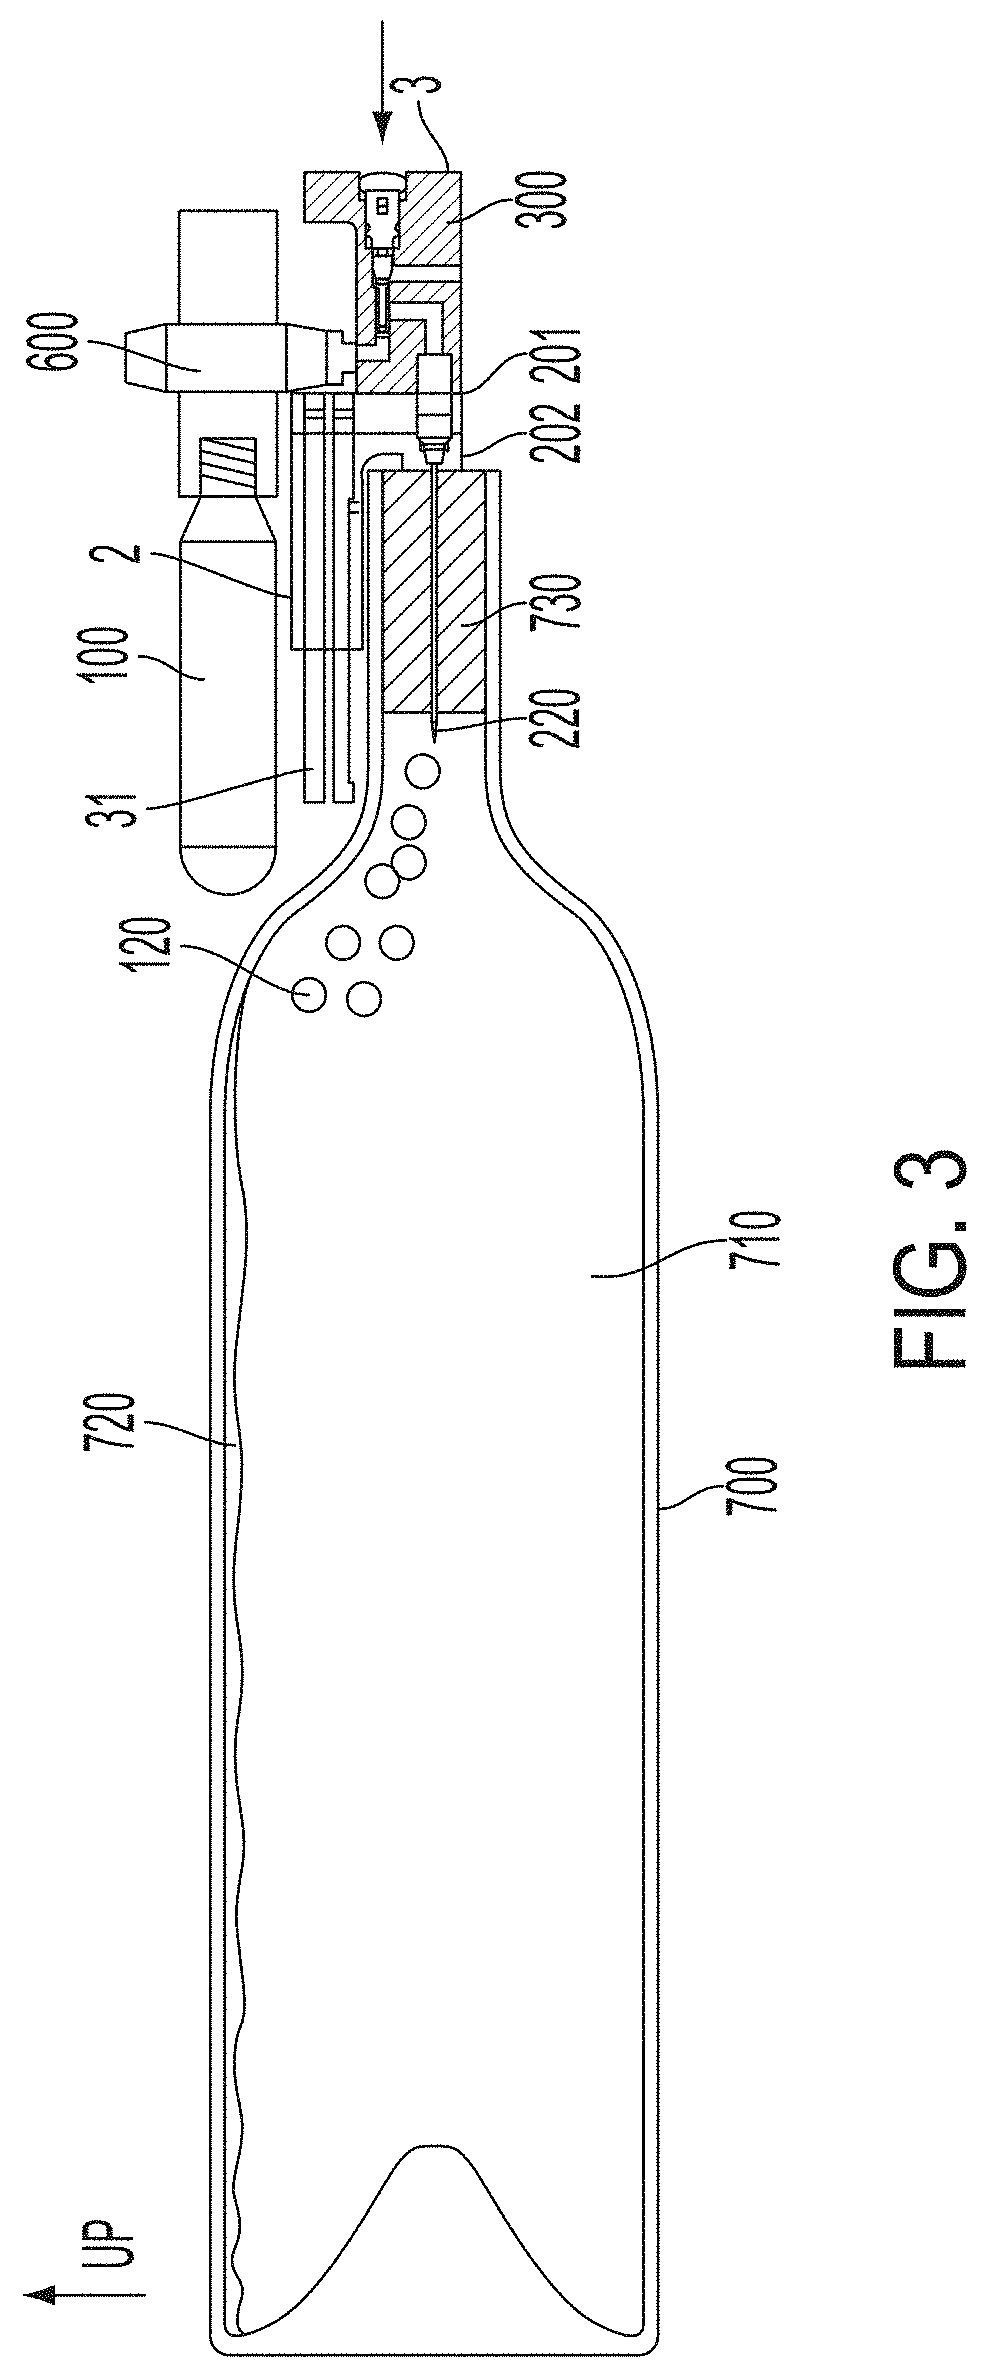 Needle with particle control for beverage dispensing